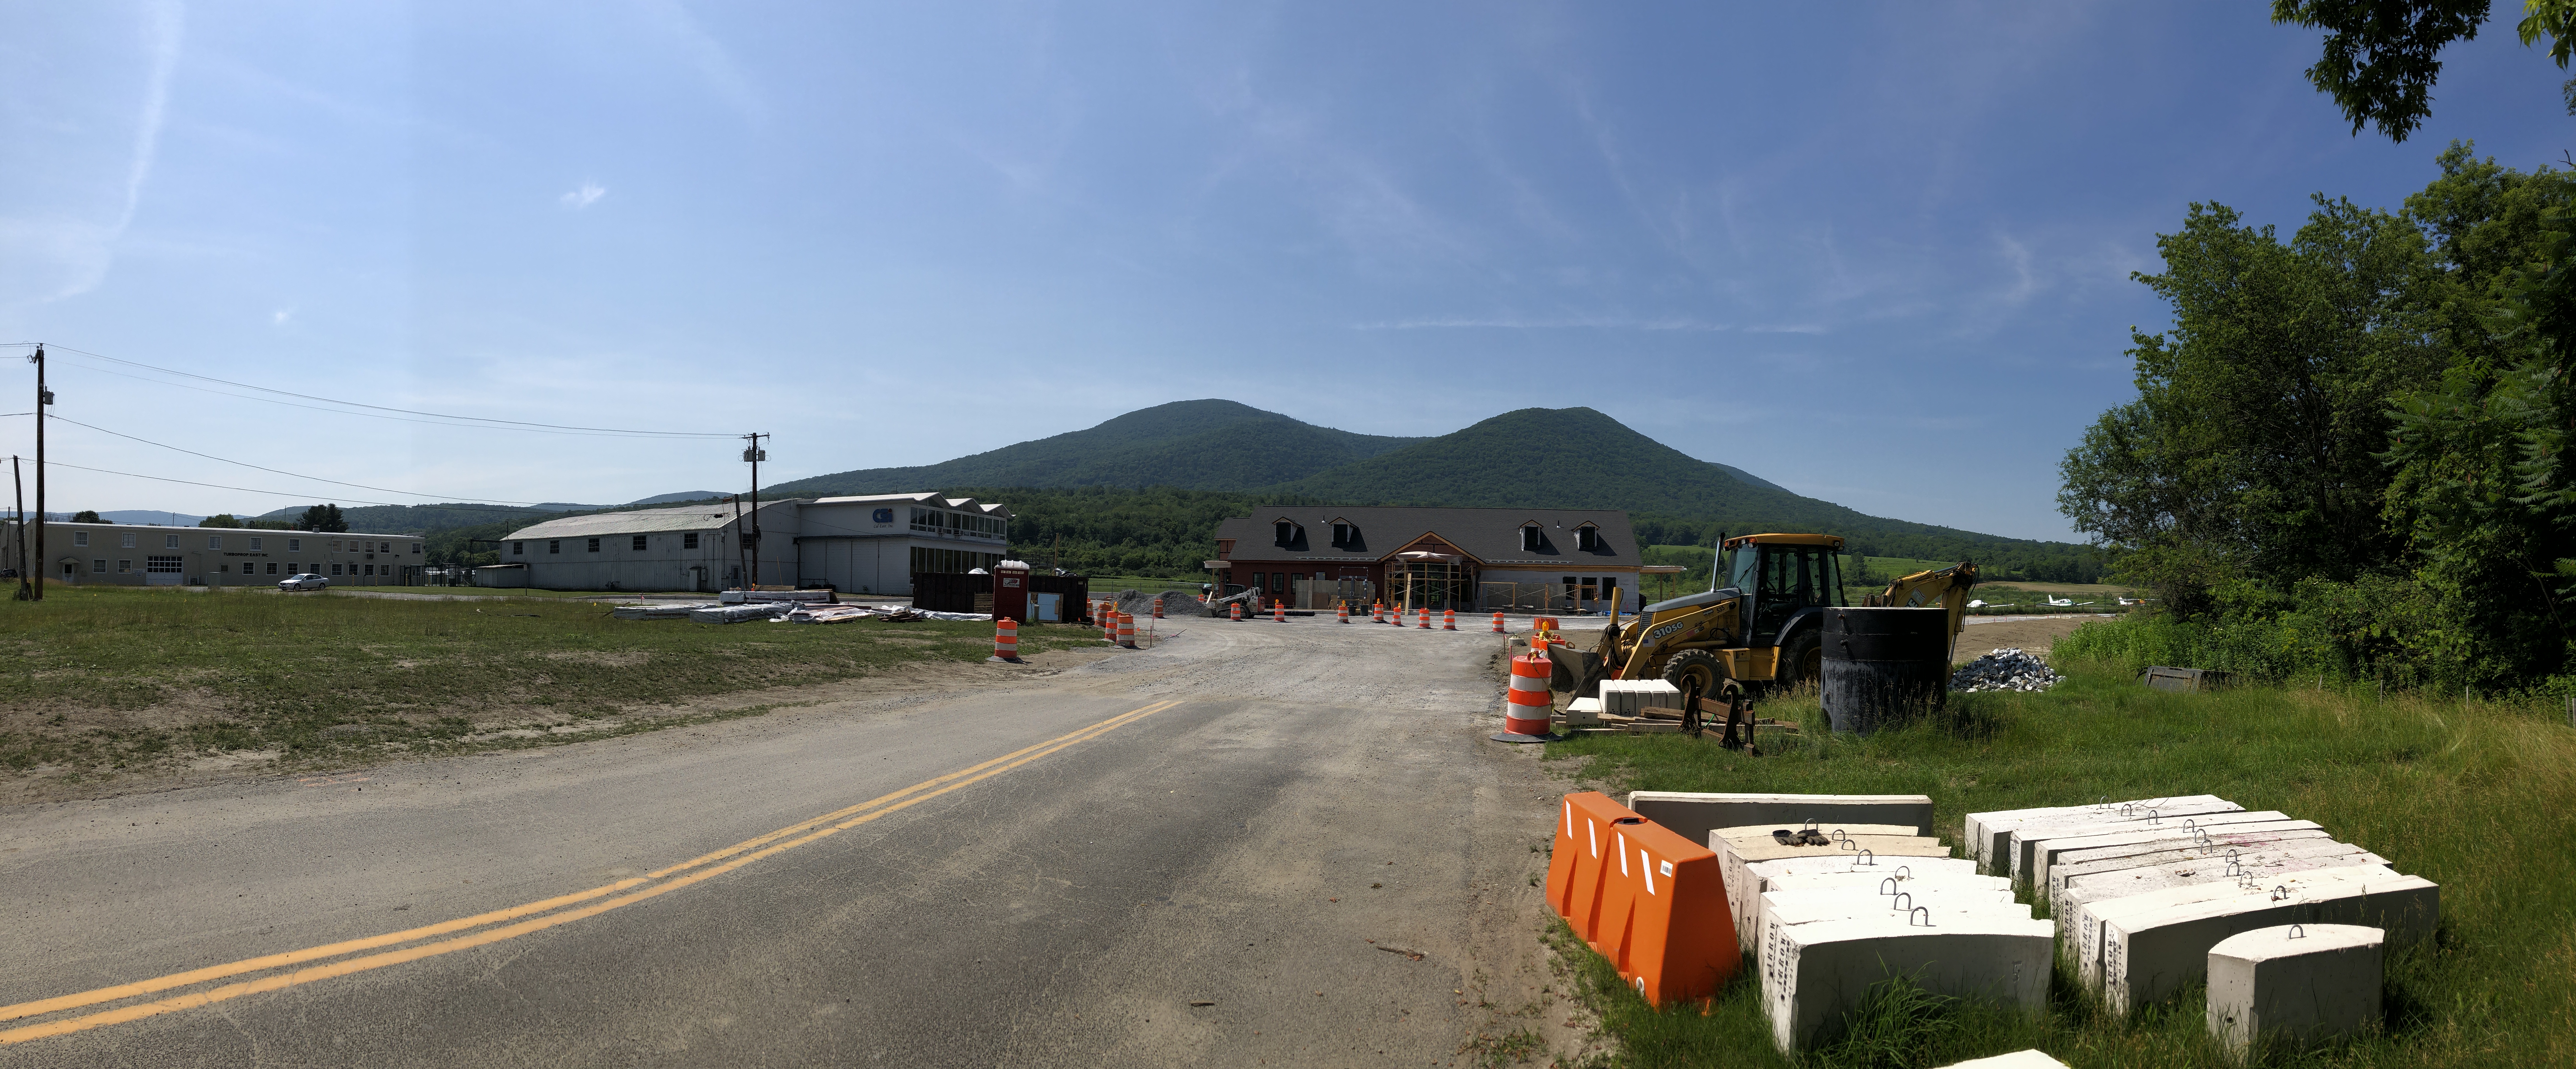 View from the airport's driveway.  A building is under construction in the center, with the mountain peaks beyond.